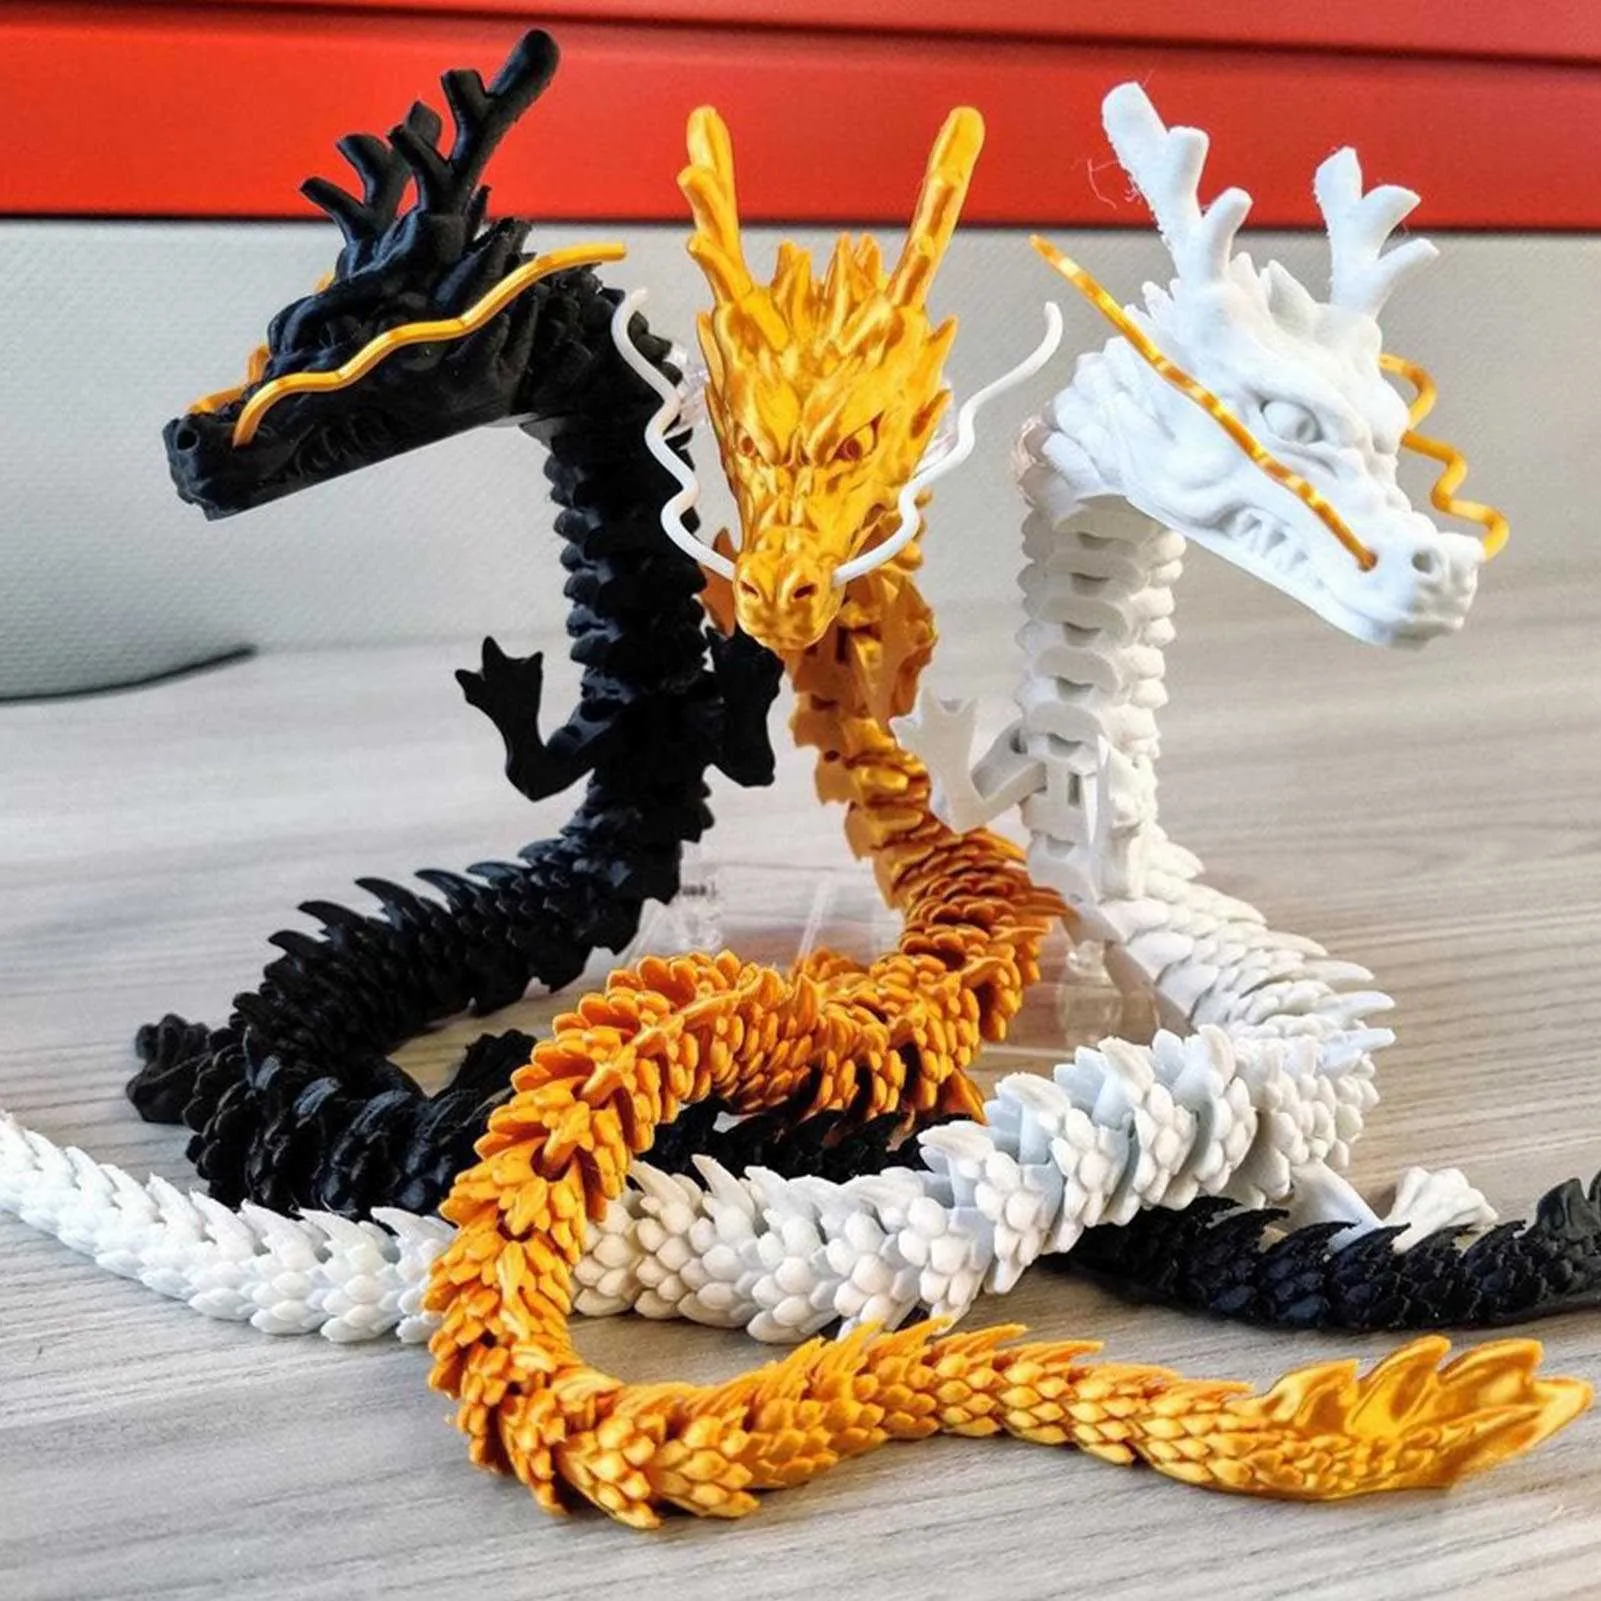 3D Printed Articulated Dragon Chinese Long Flexible Realistic Ornament Toy  For Home And Office Decoration, Kids Gifts Crab Novelty Items G230520 From  Us_north_dakota, $13.27